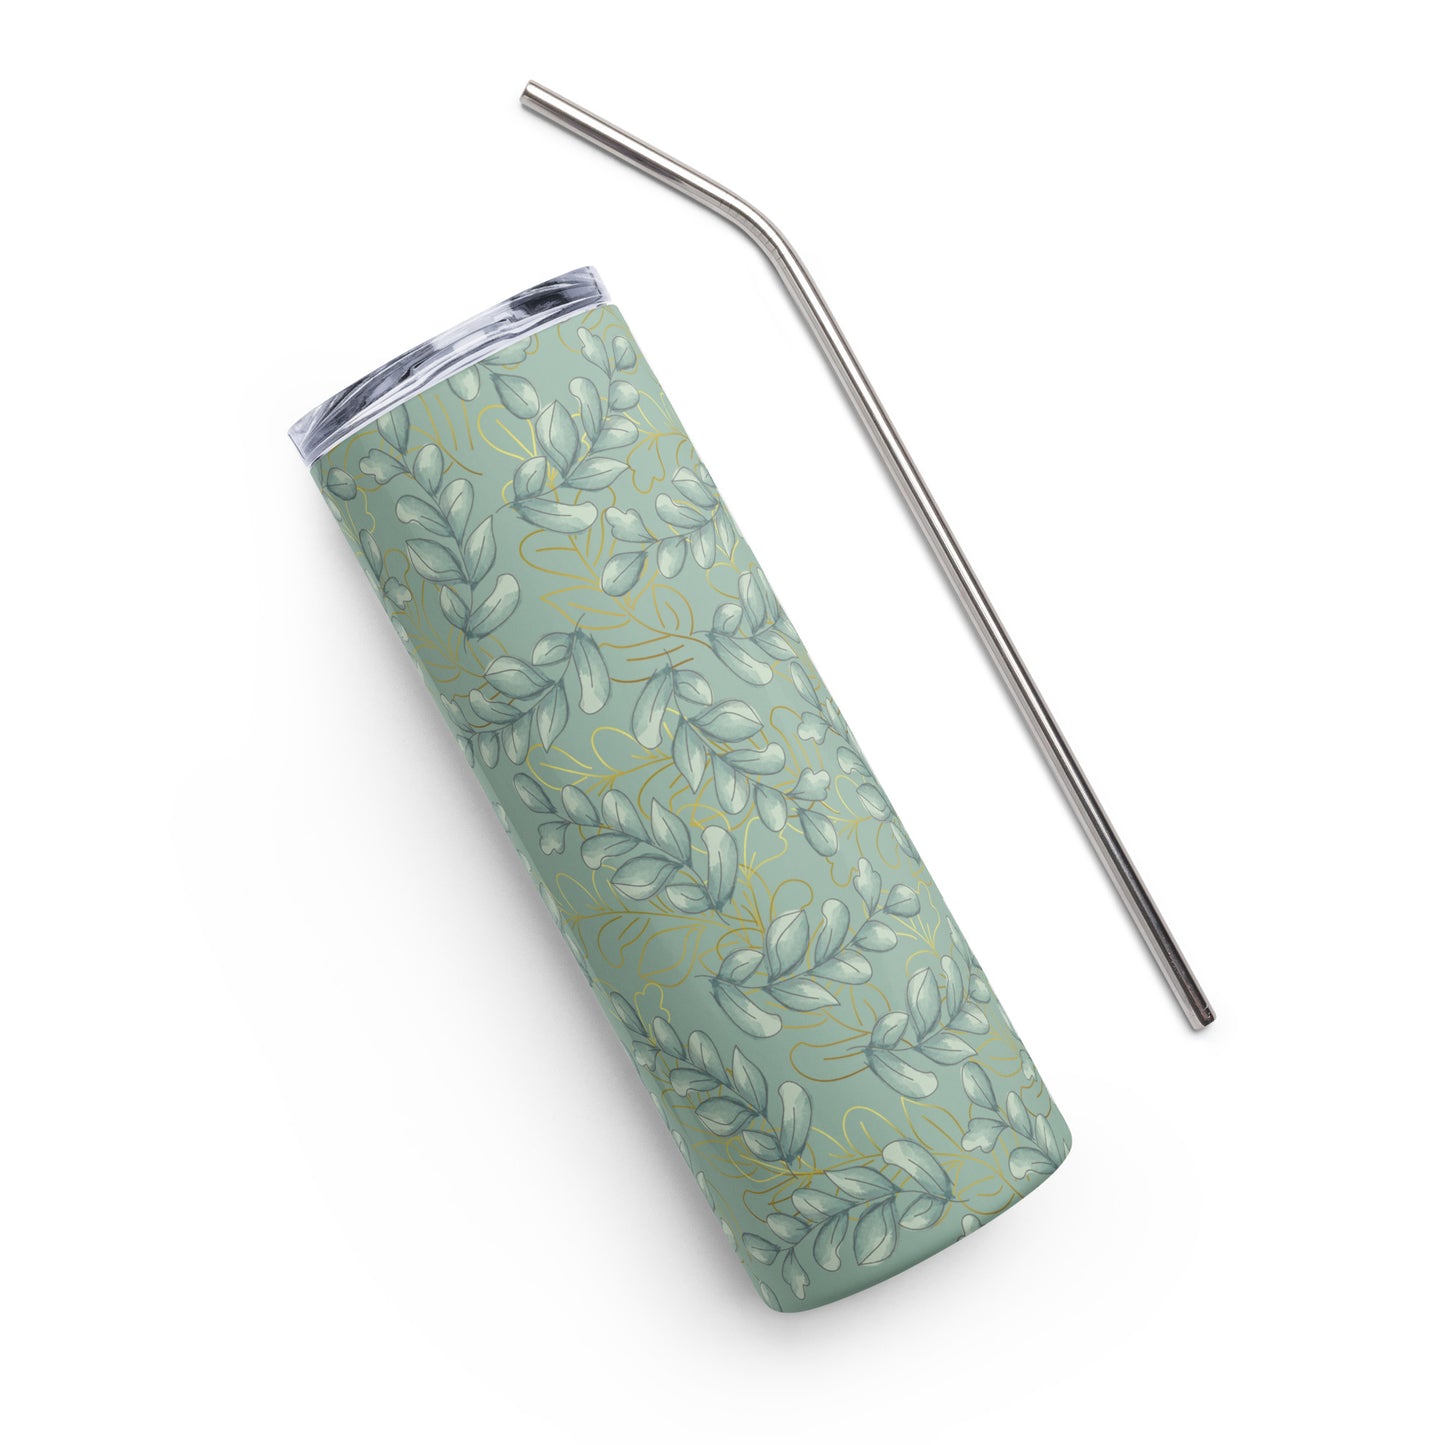 Stainless steel tumbler - CaBougieDo Green & White Leafs